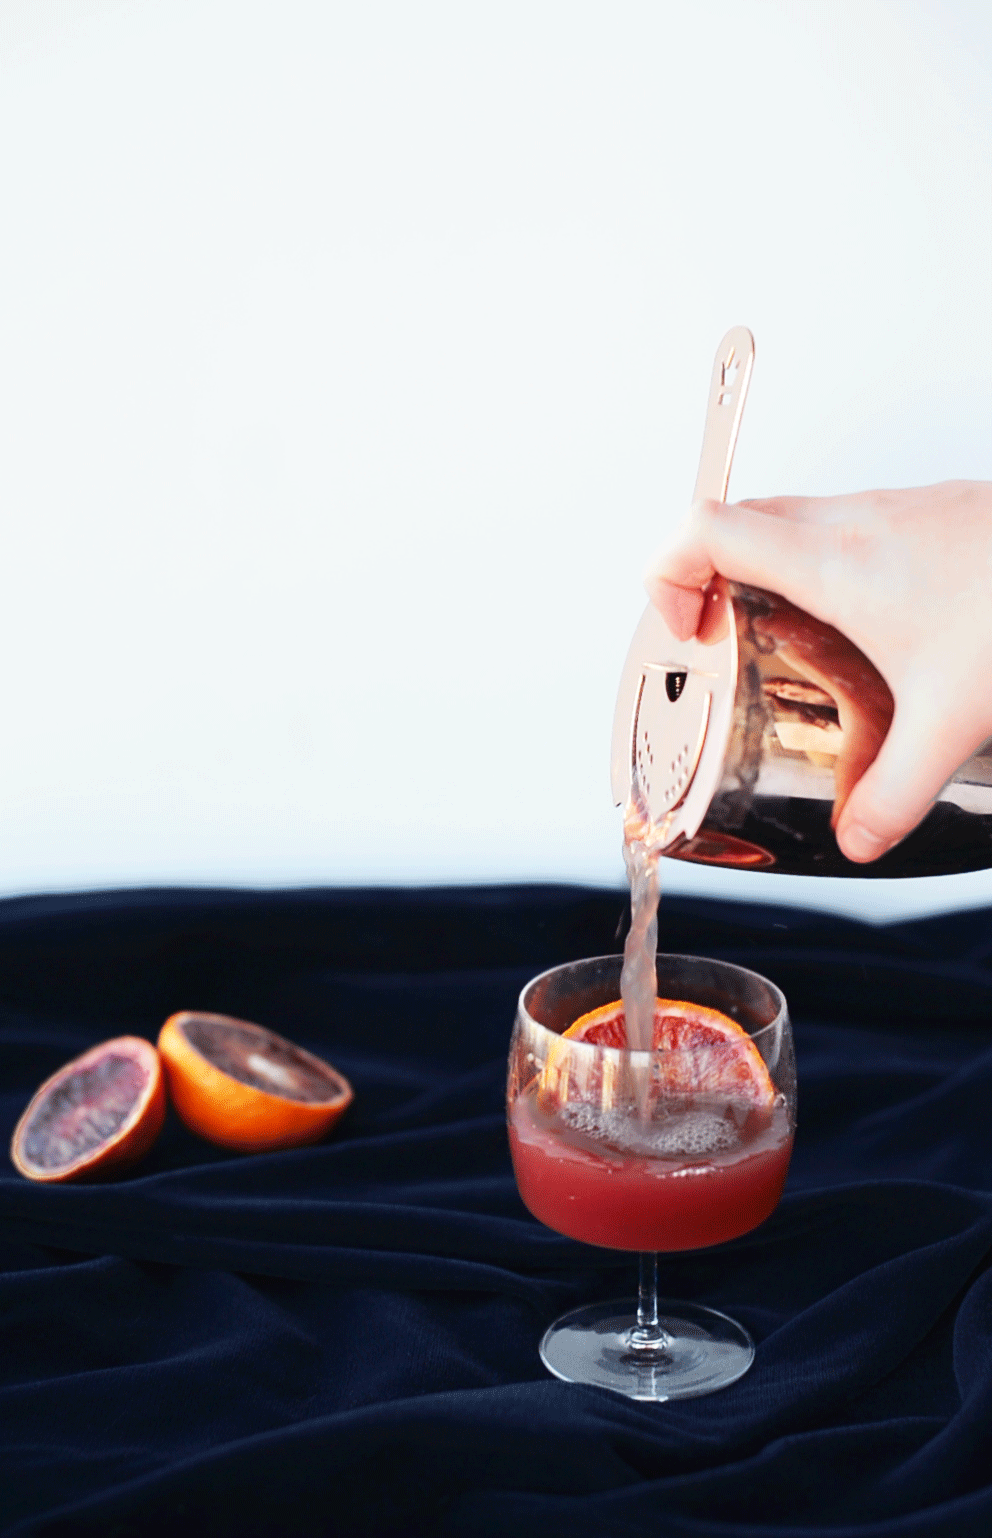 Peat Repeat cocktail with scotch and blood orange juice | recipe on Craft + Cocktails (craftandcocktails.co)